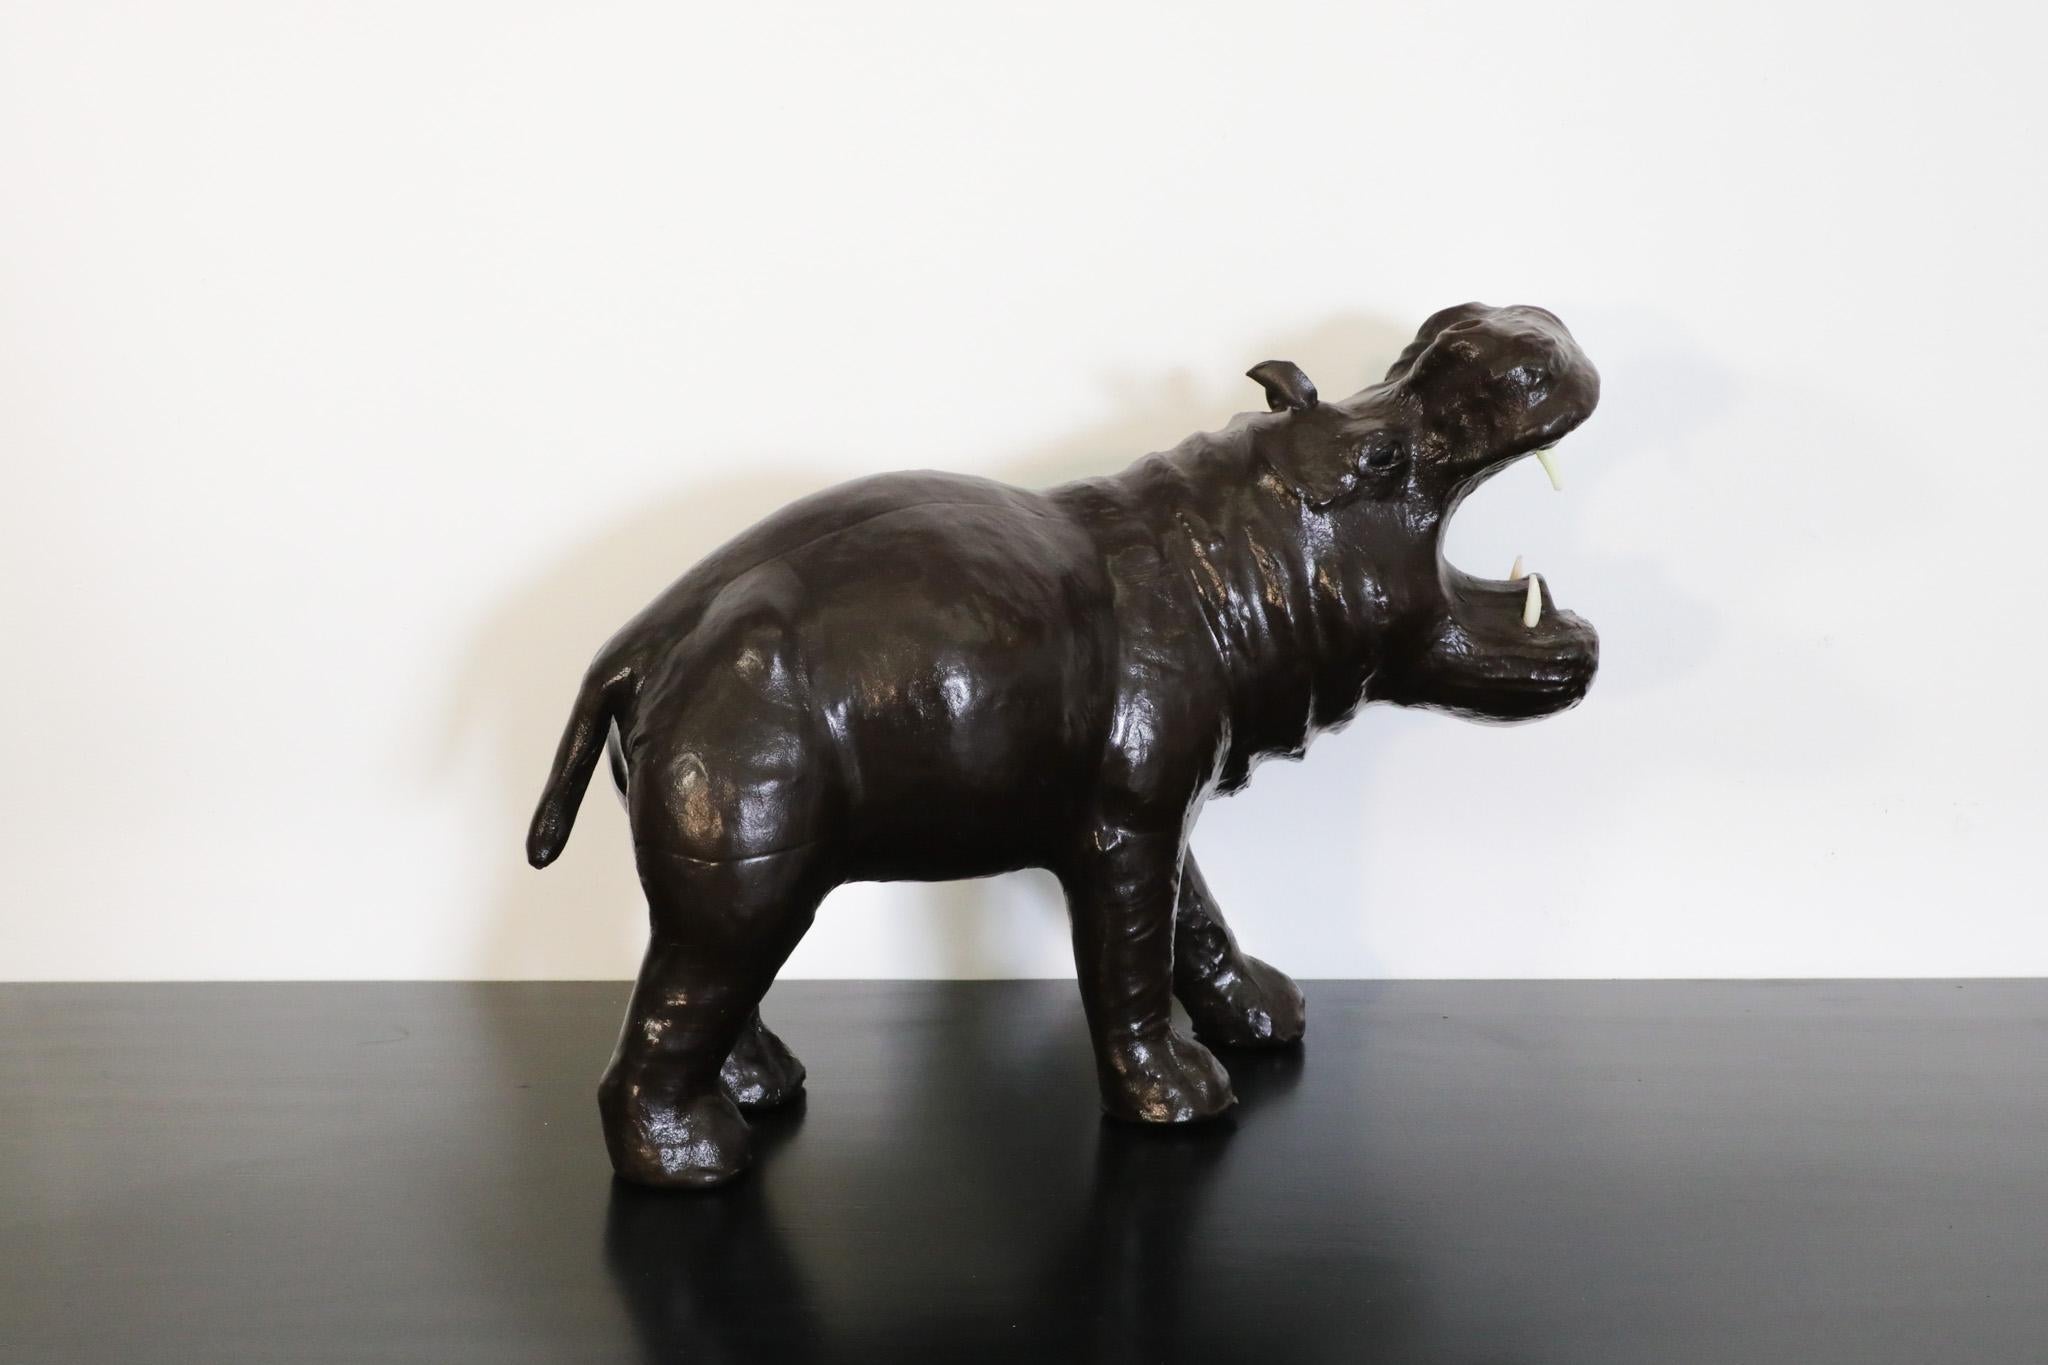 Beautiful Mid-Century hippopotamus sculpture crafted in France. The detailed leather figure is in excellent condition and adorns a rich patinated finish. the hippo's mouth is open and bears four pointy teeth. Perfect sculpture for a shelf in a study